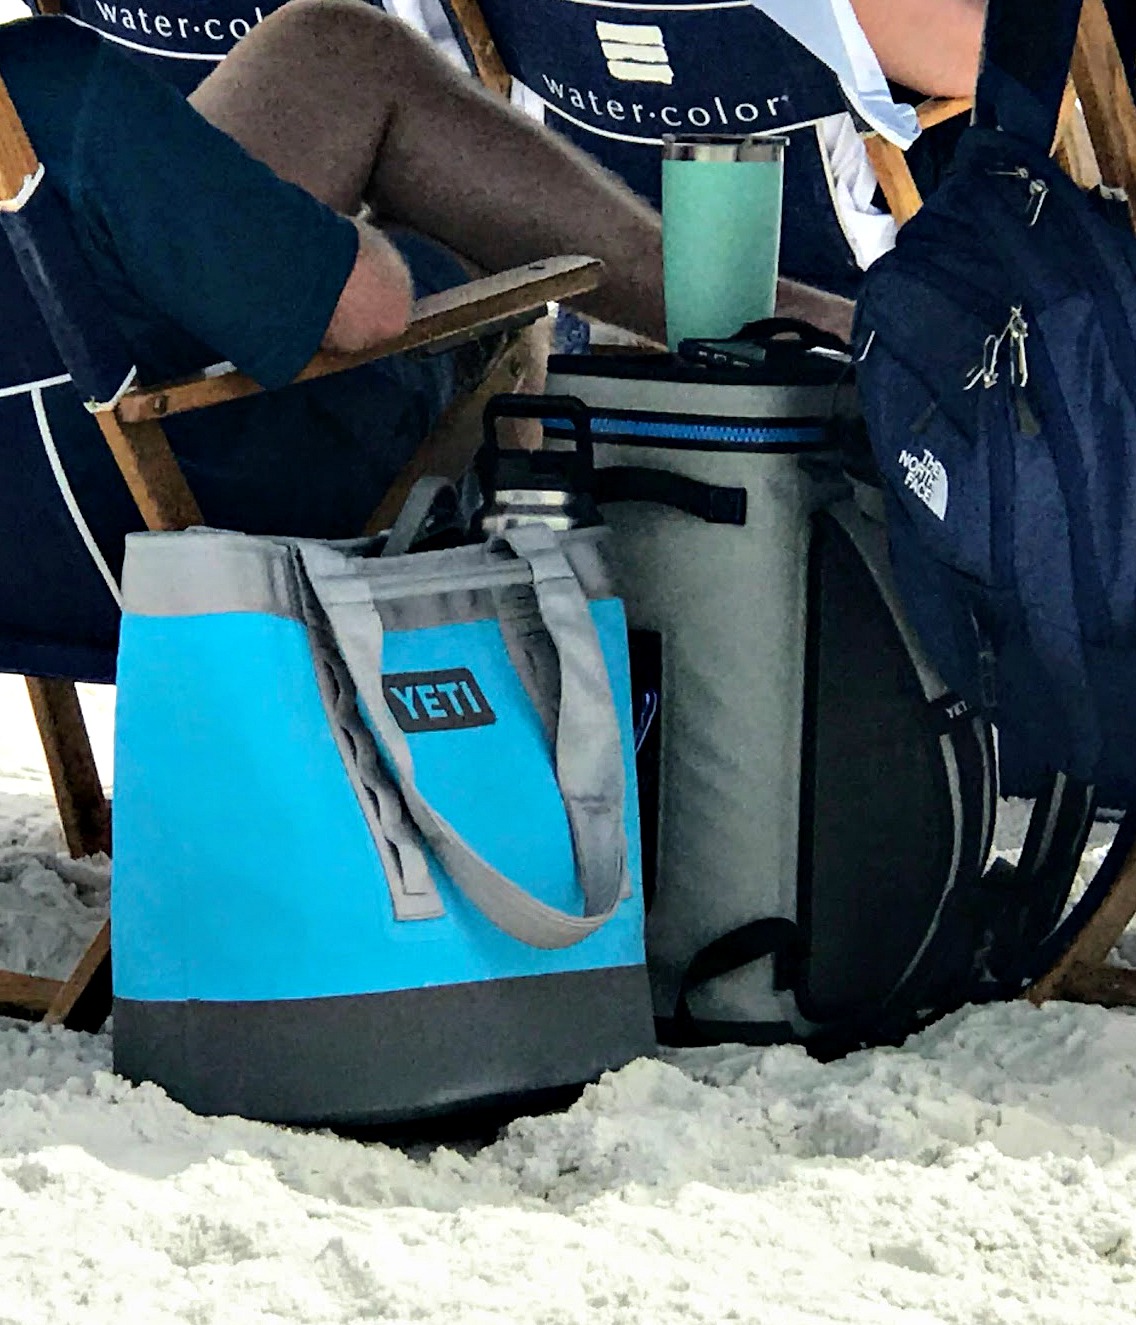 insulated beach tote cooler bag